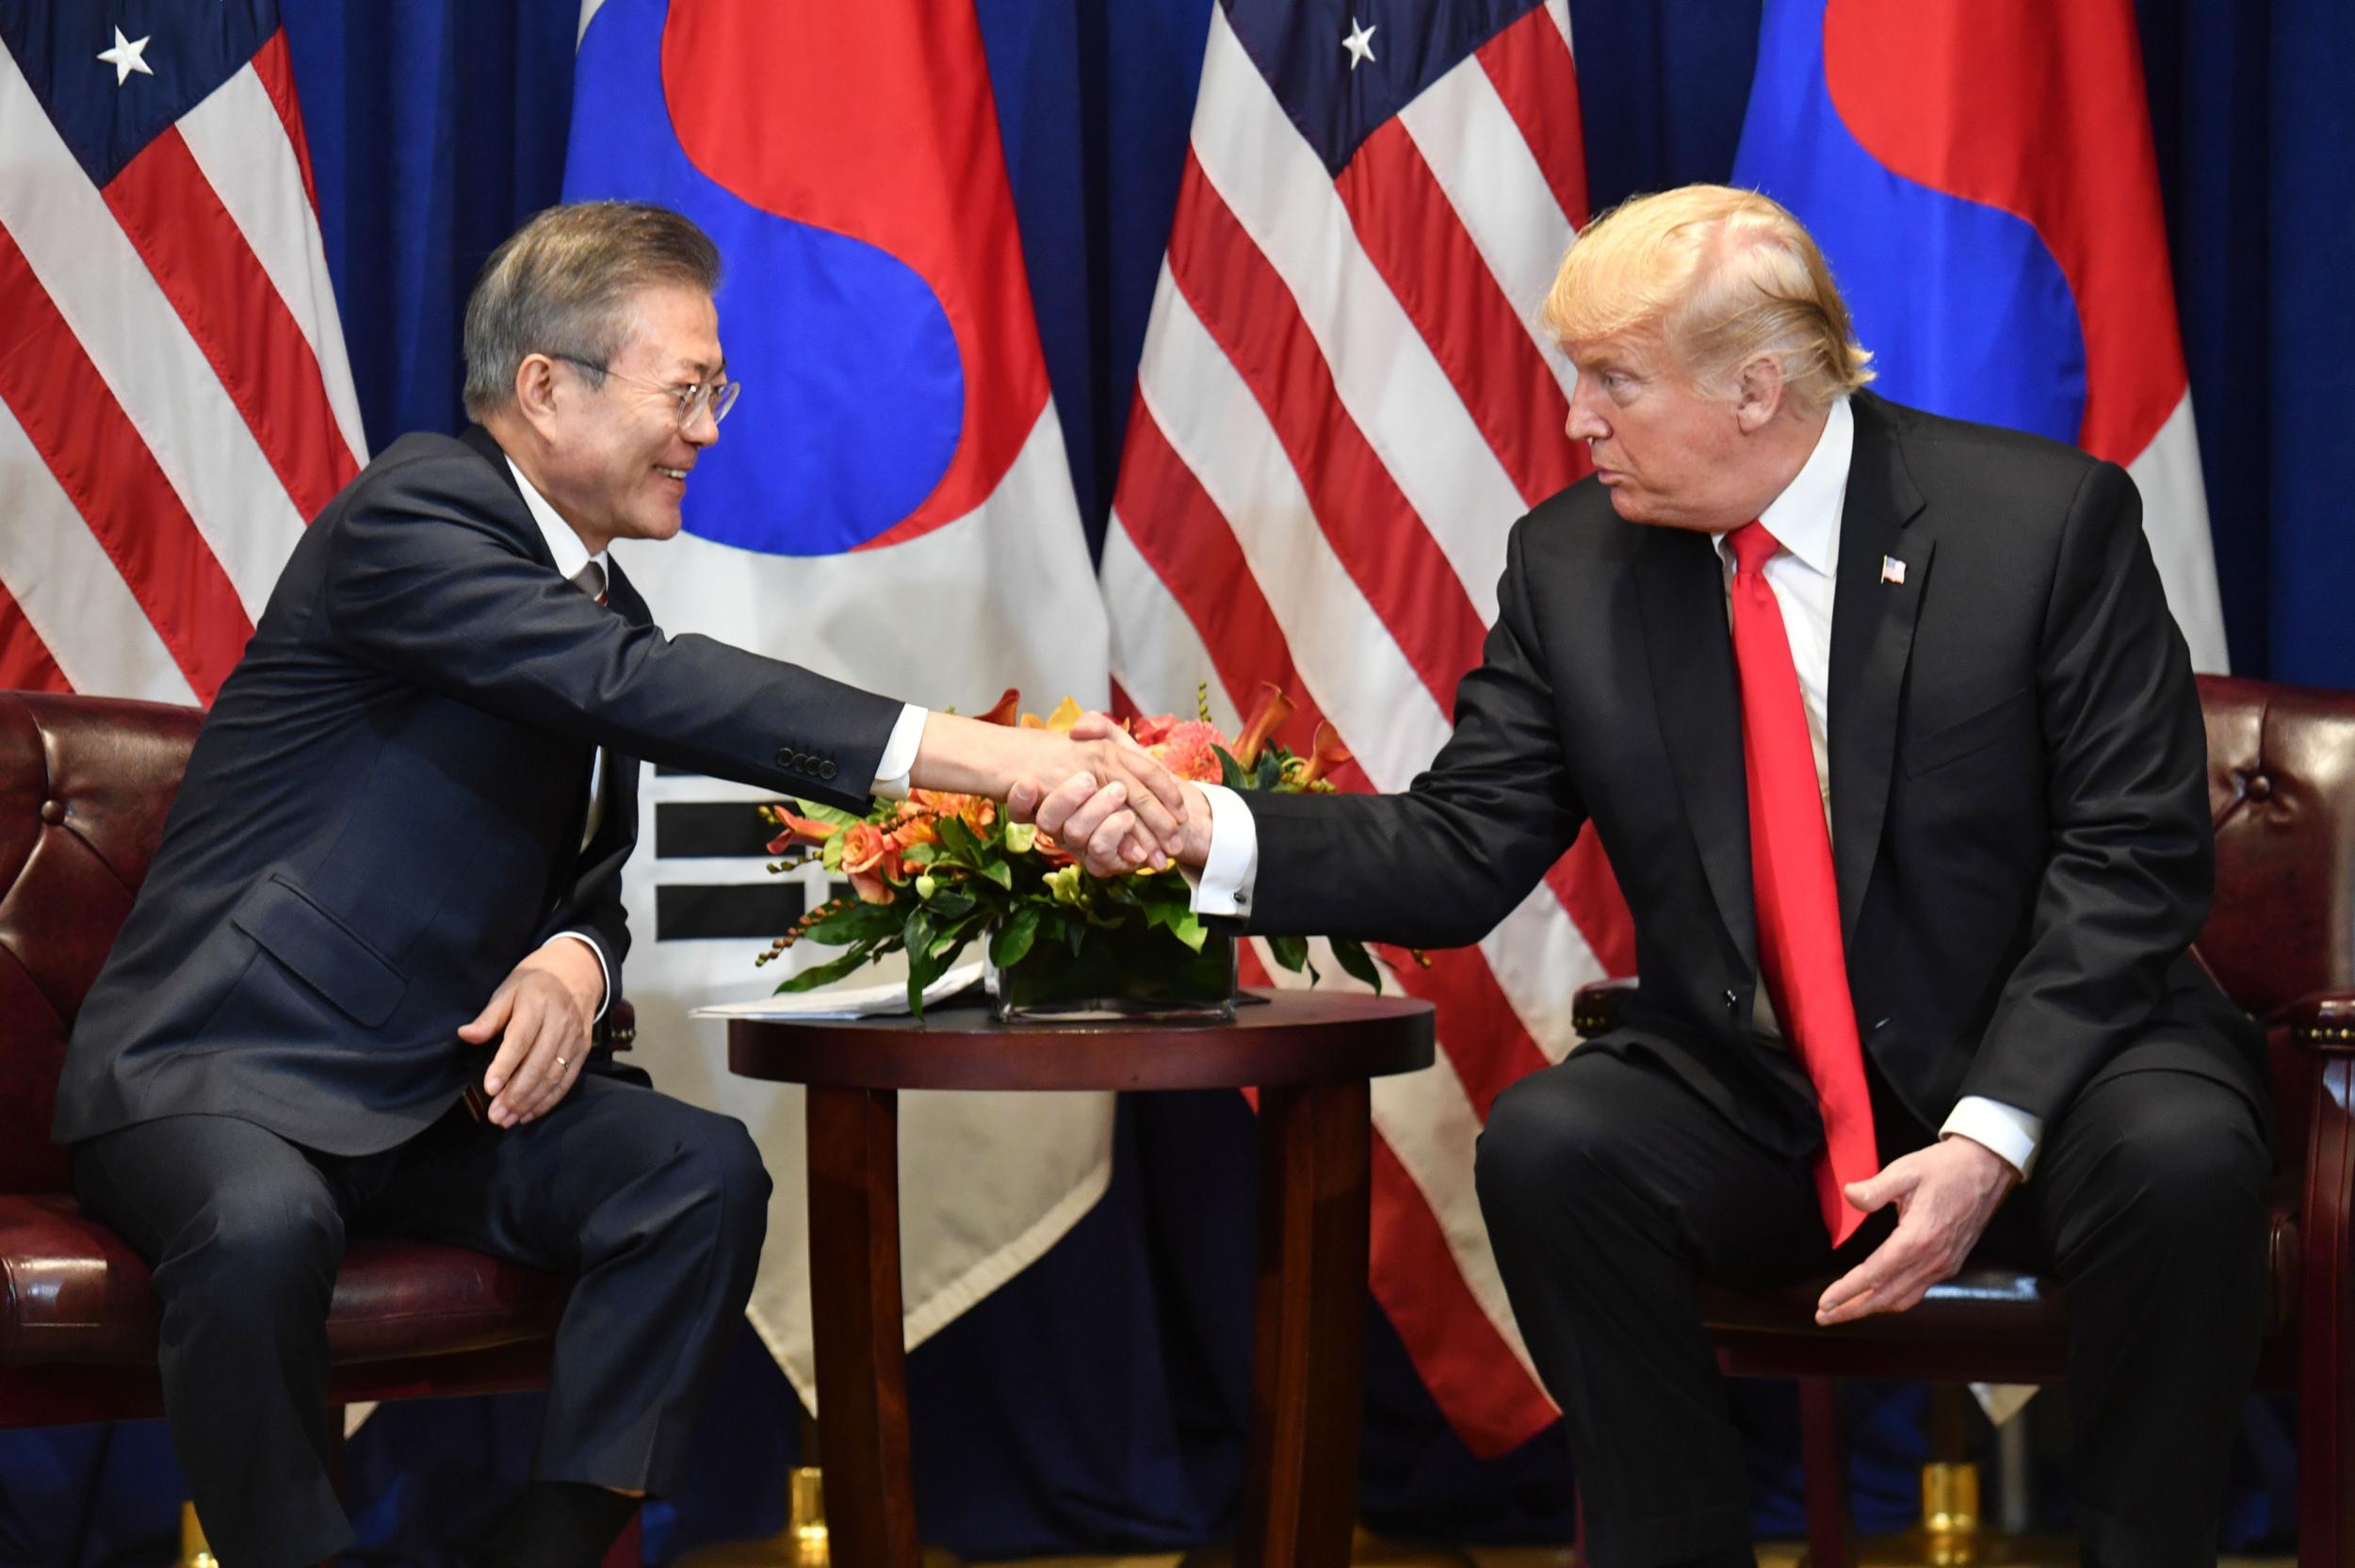 US President Donald Trump shakes hands with South Korean President Moon Jae-in during a bilateral meeting in New York on 24 September 2018